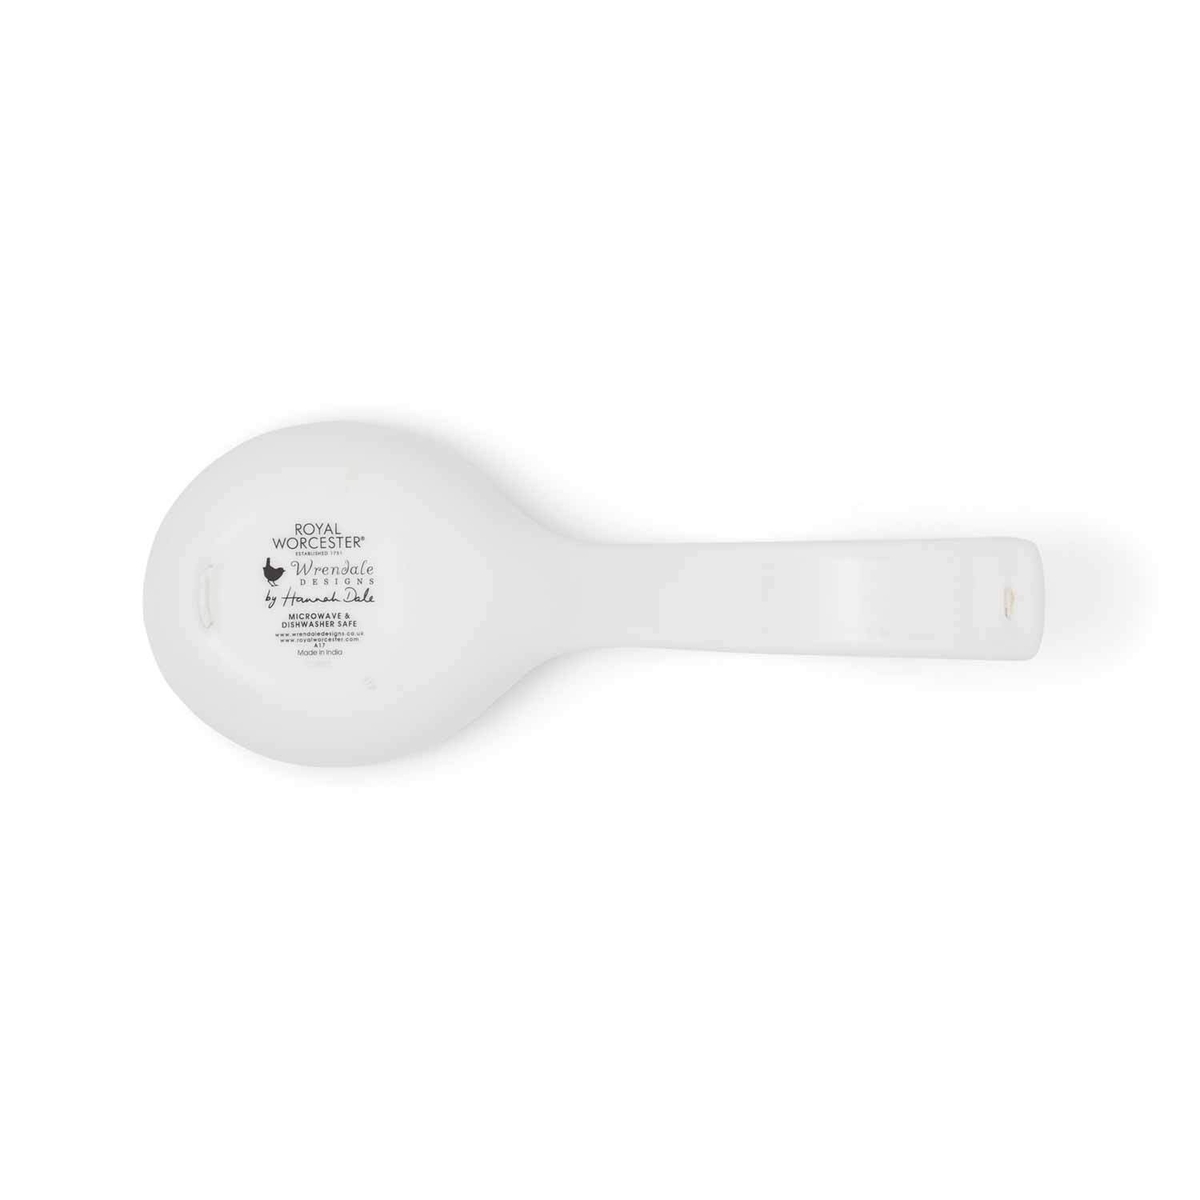 Wrendale Designs Mice Spoon Rest image number null